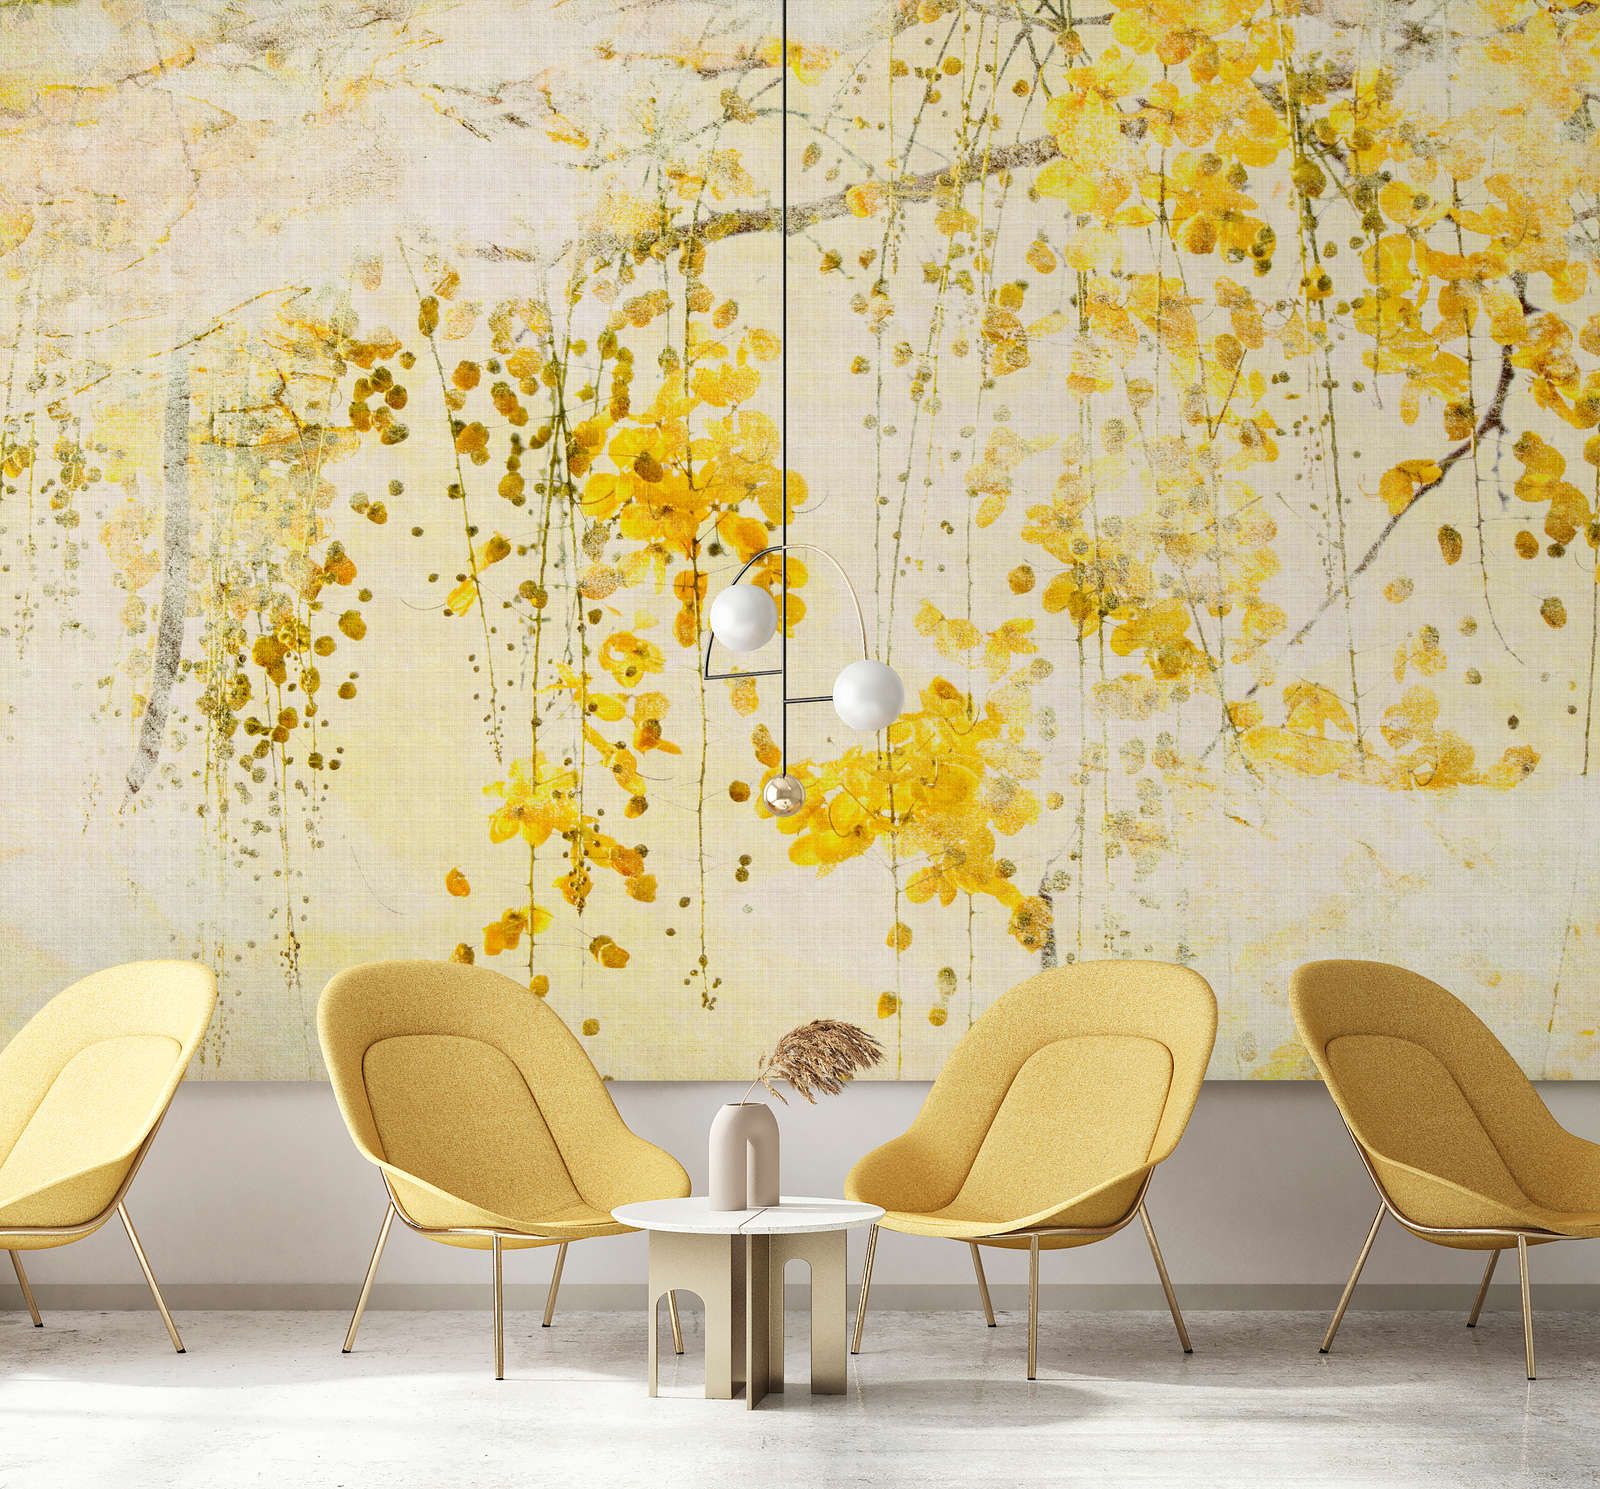             Photo wallpaper »taiyo« - Flower garland with linen structure in the background - Yellow | Light textured non-woven
        